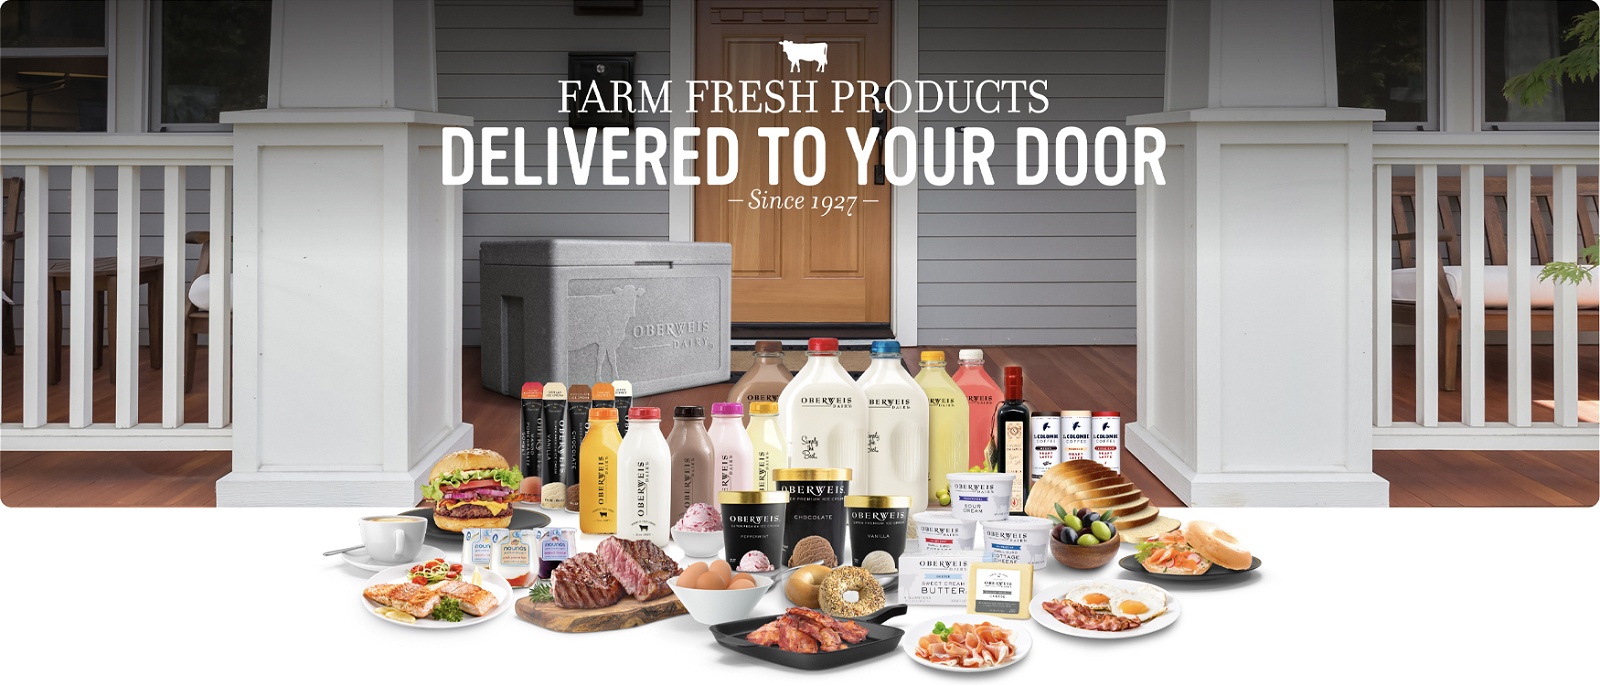 Milk and Eggs: Farm-to-Table Grocery Delivery